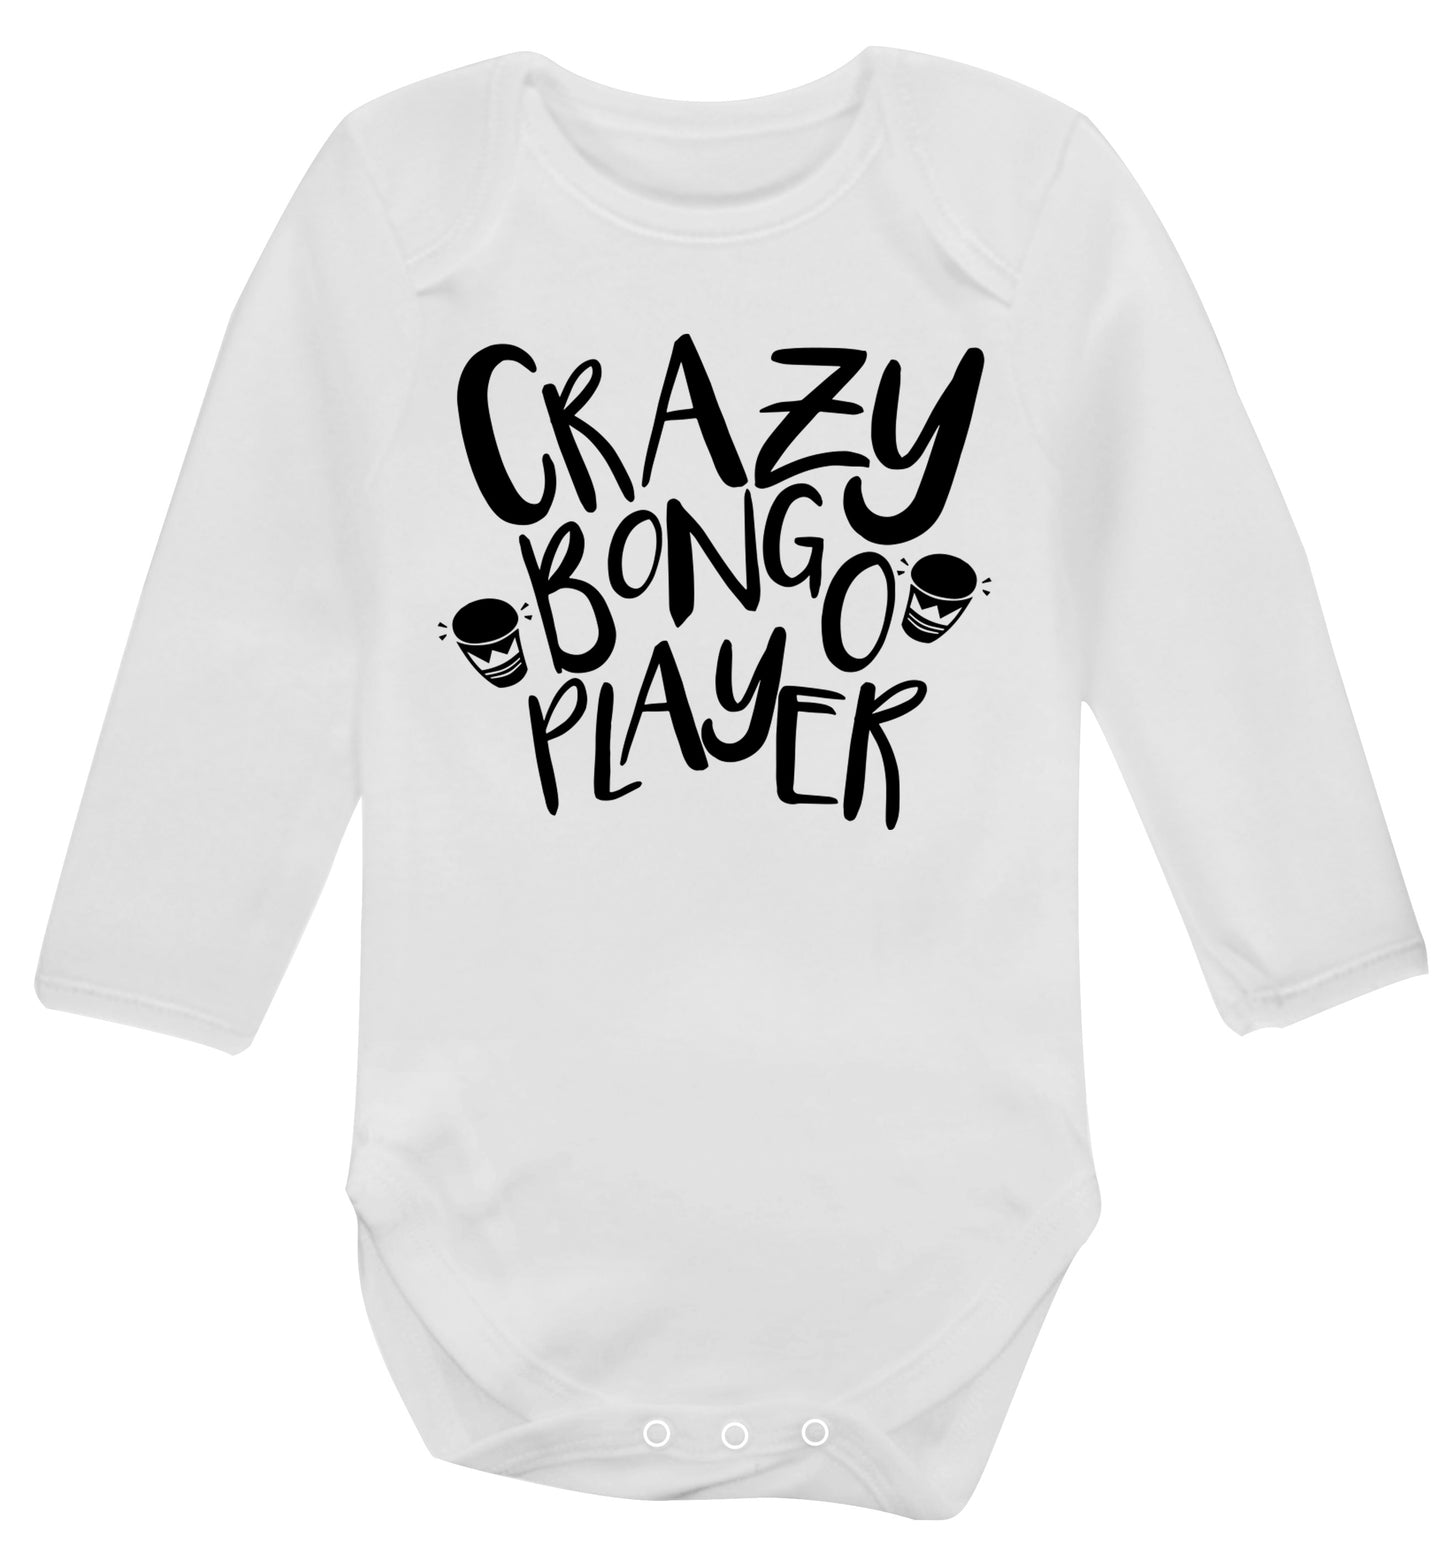 Crazy bongo player Baby Vest long sleeved white 6-12 months